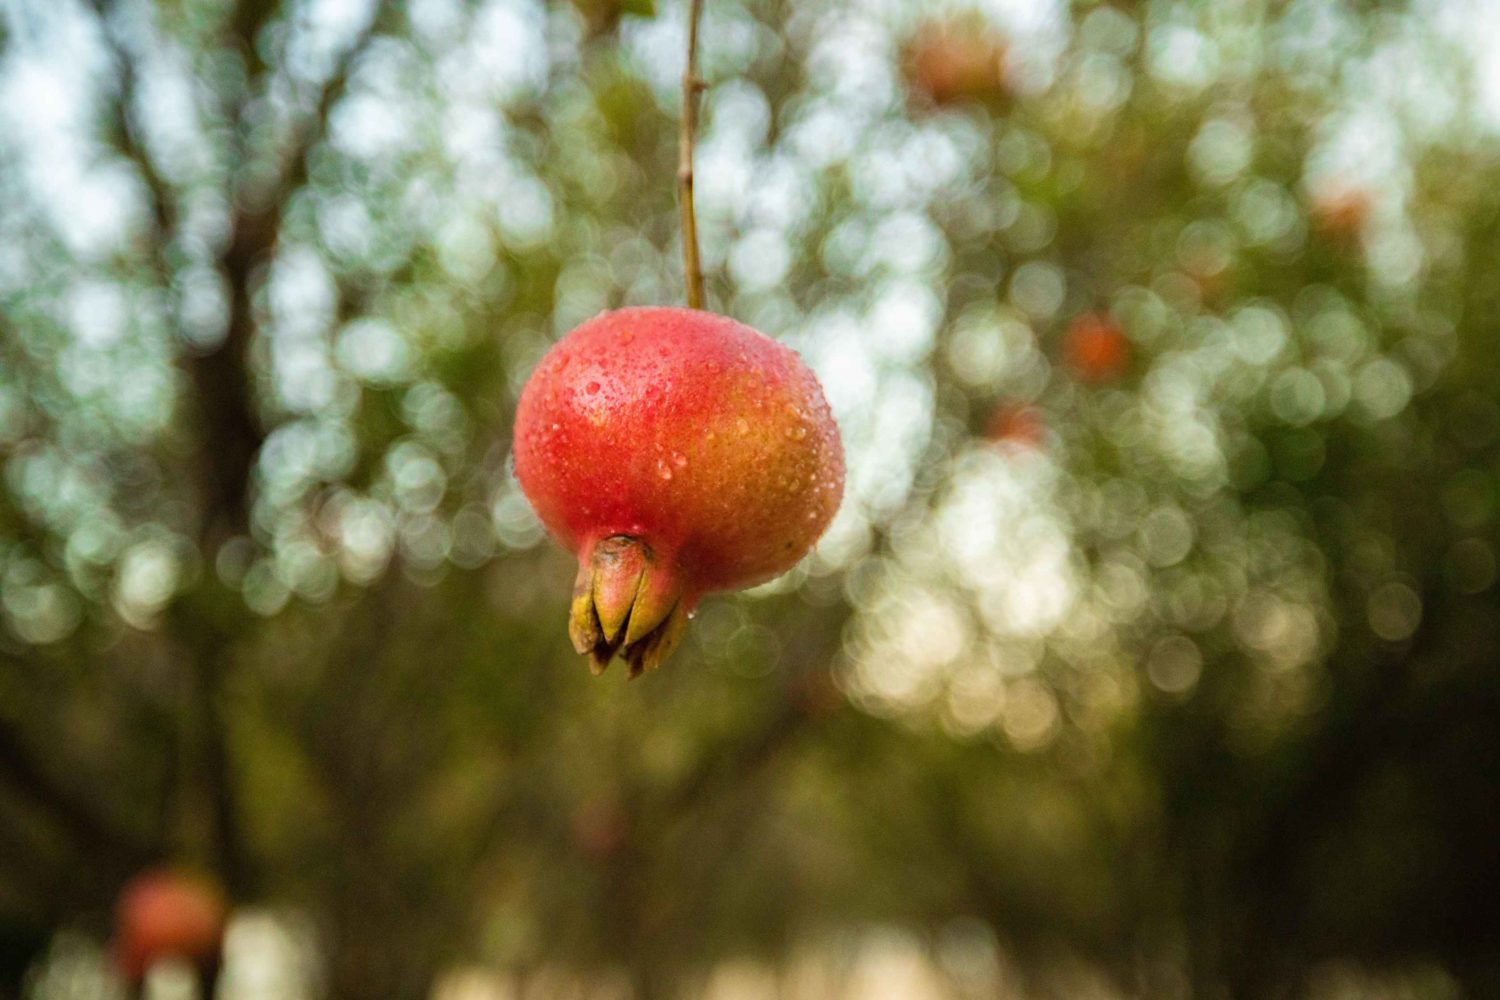 Pomegranate hanging from a tree